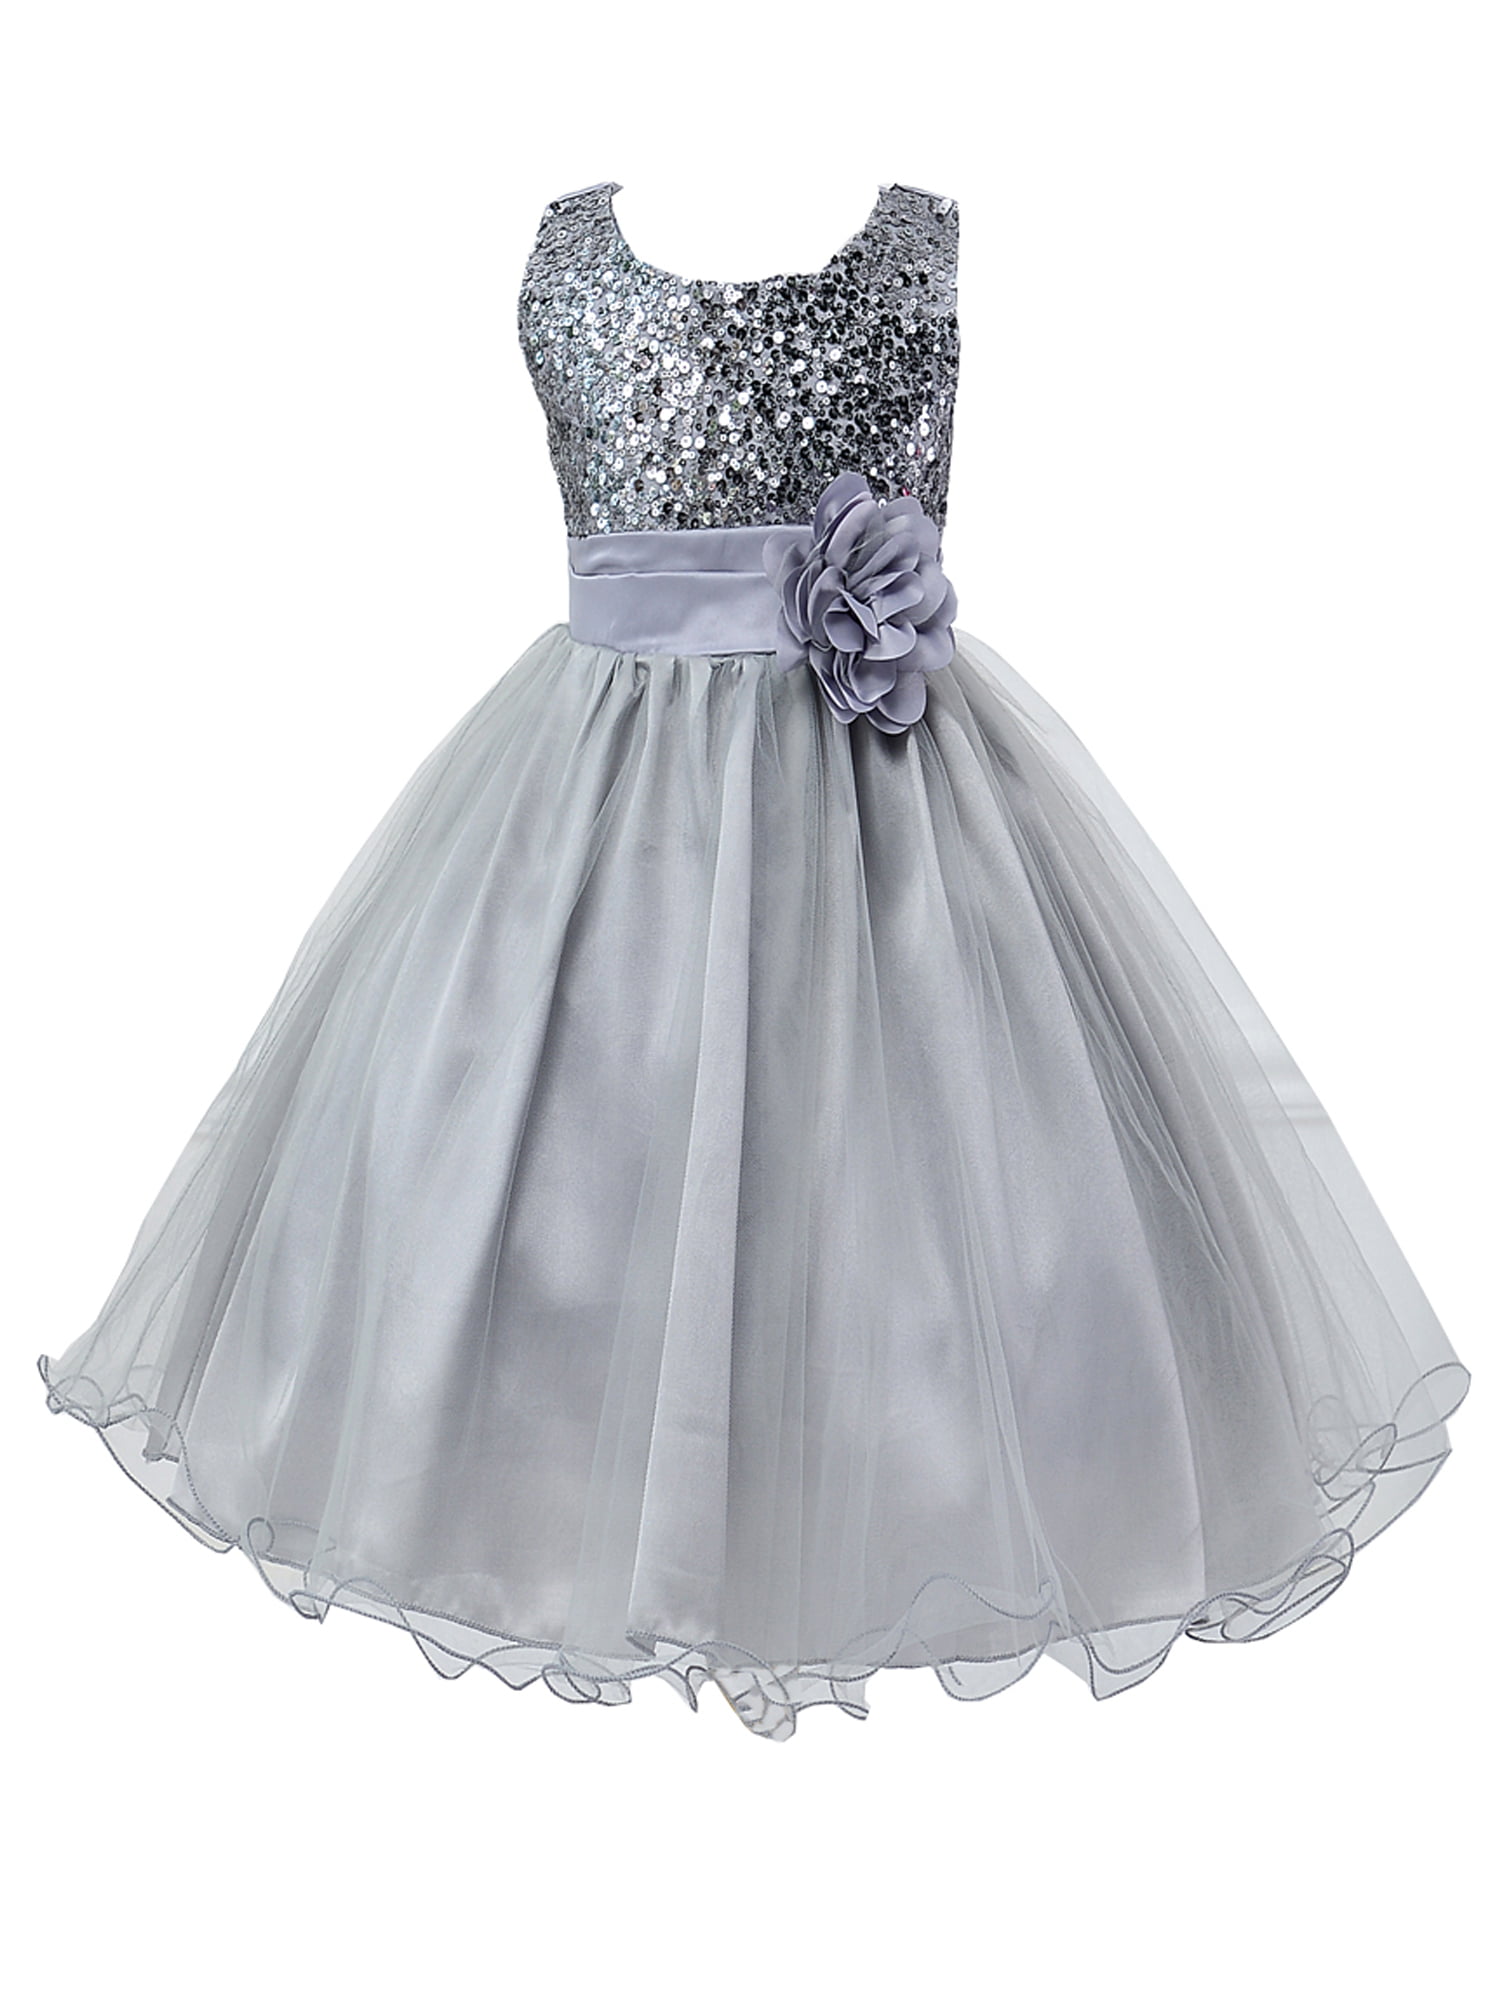 Details about   Princess Baby Girls Floral Dress Lace Wedding Bridesmaid Princess Party Pageant 